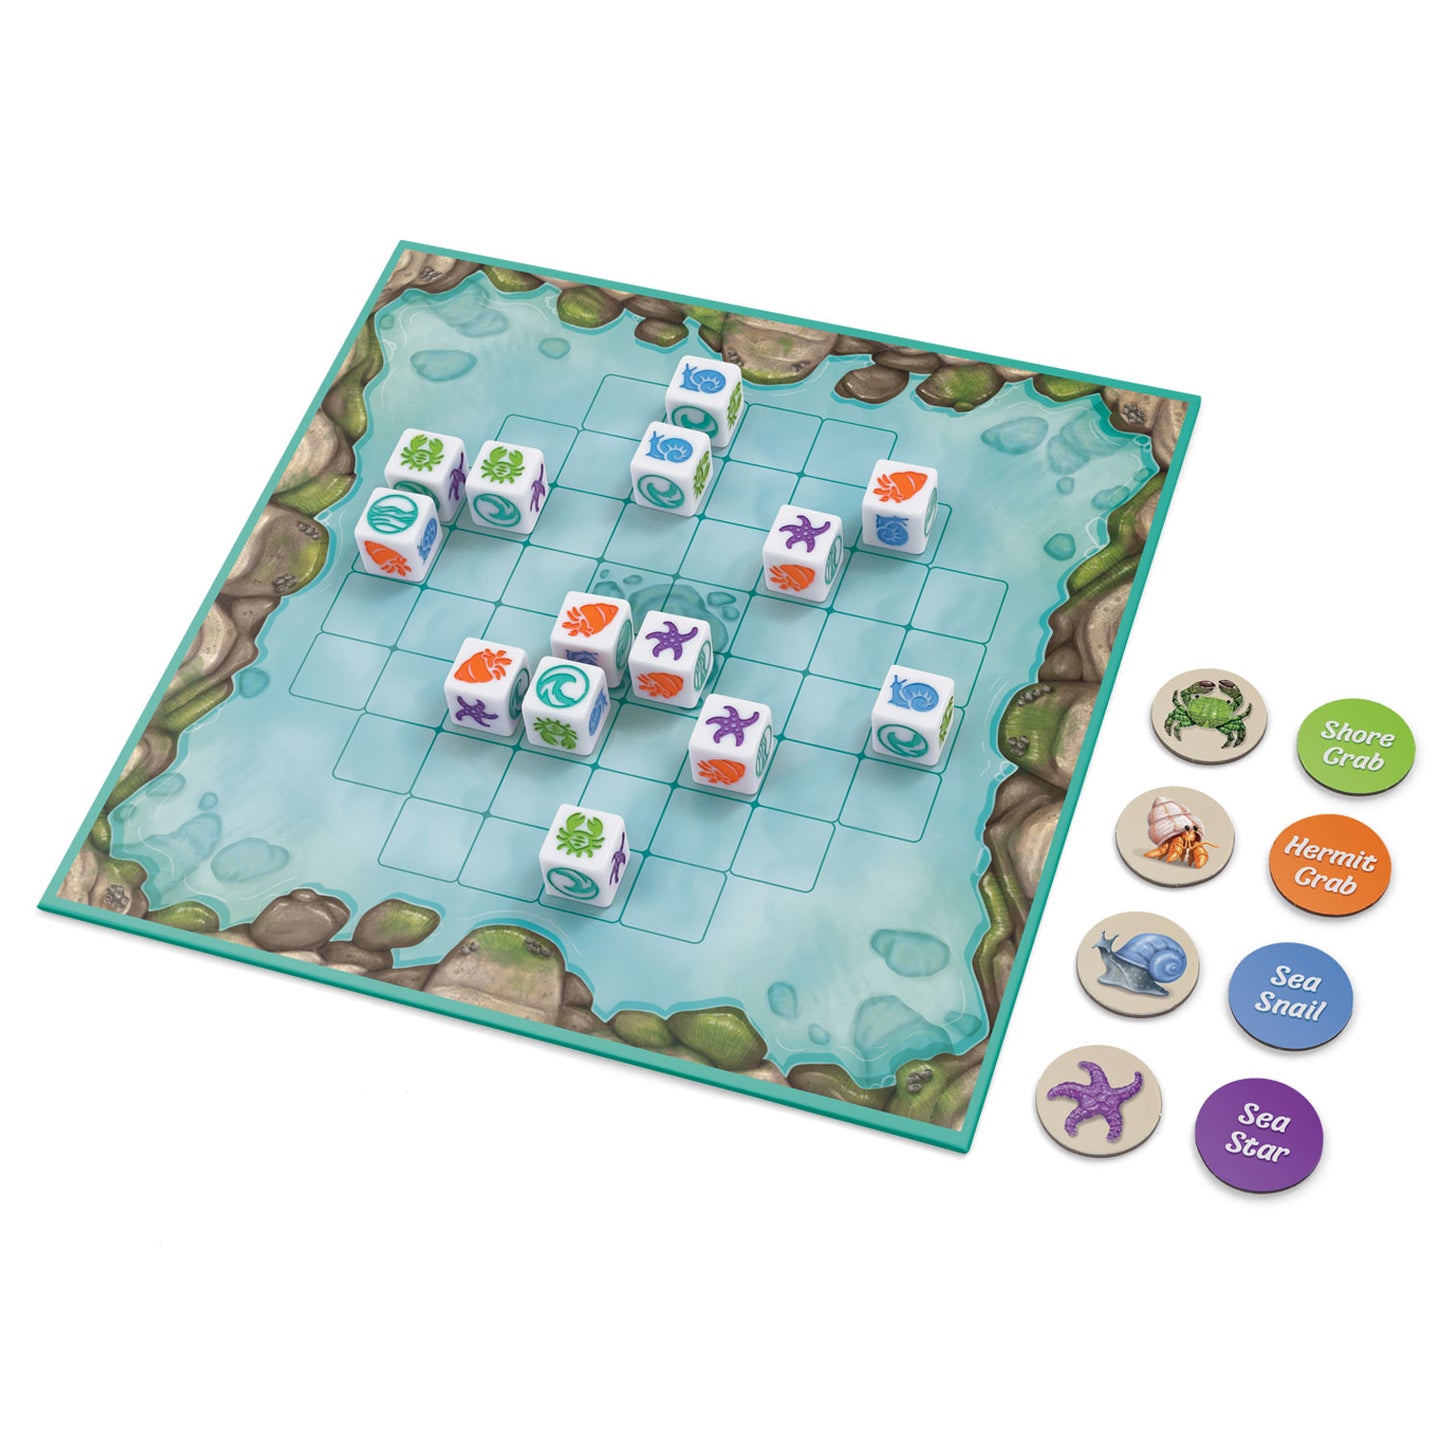 Rolling Tides - a fun dice game and decision-making game